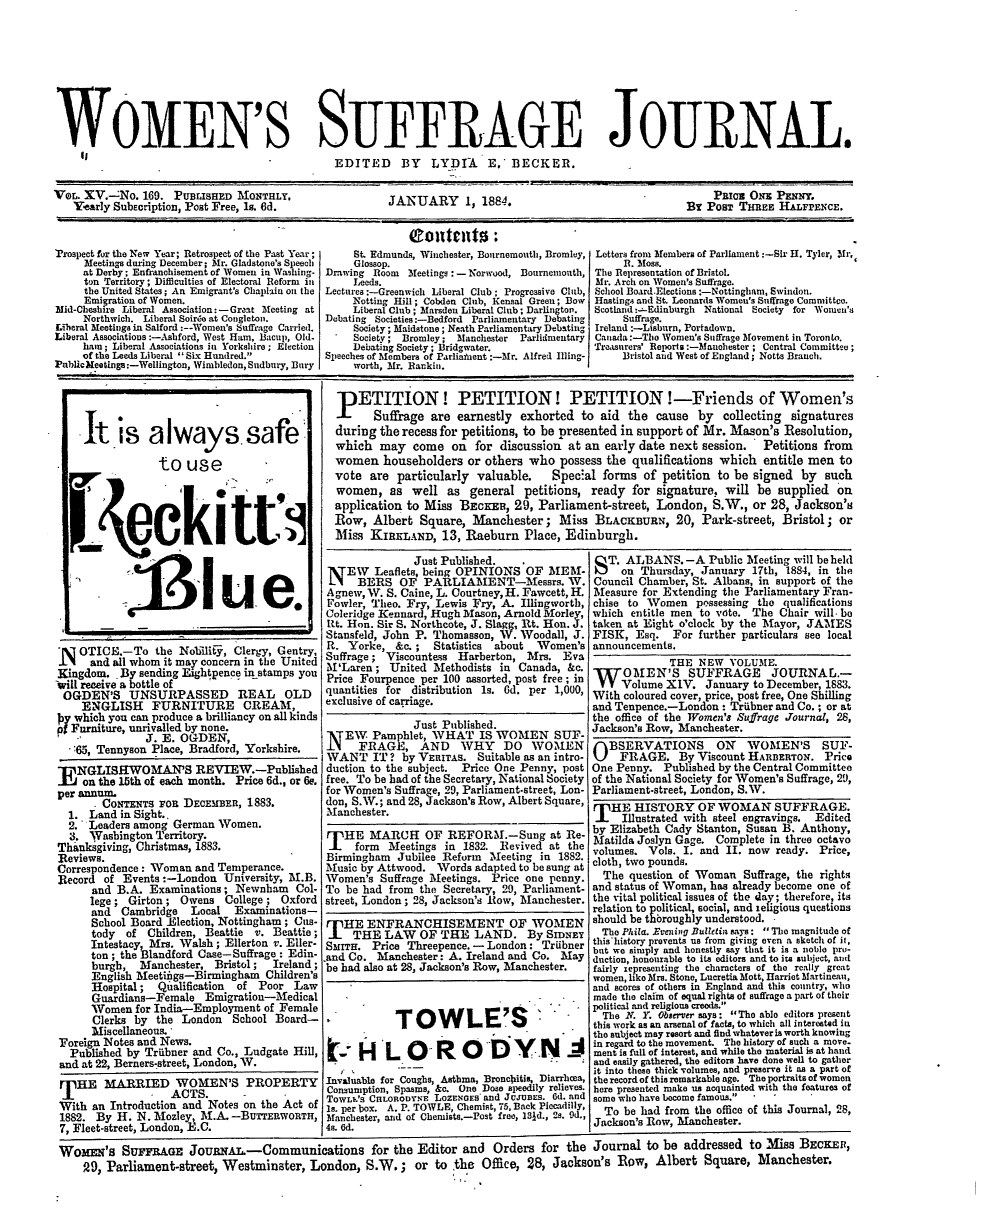 handle is hein.journals/wmsuffpr15 and id is 1 raw text is: 









WOMEN'S SUFFRAGE JOURNAL.
                                               EDITED BY LYDIA          E,  BECKER.

VeL. XV.-No.   169. PULasan    MONTHLY,                 JANUARY      1, 1884.                                ru Pos OH PENNY .
   Yearly SubEcription, Post Free, Is. 6d.                                                                By POST THREE  HALFFENCE.


Trospect for the New Year; Retrospect of the Past Year;   St. Edmunds, Winchester, Bournemouth, Bromley, Letters from Members of Parliament:-Sir H. Tyler, Mr,
     Meetings during December; Mr. Gladstone's Speech Glossop.                                 R. Moss.
     at Derby: Enfranchisement of Women in Washing- Drawing Room Meetings : - Norwood, Bournemouth, The Representation of Bristol.
     ton Territory; Difficulties of Electoral Reform in Leeds.                            Mr. Arch on Women's Suffrage.
     the United States; An Emigrant's Chaplain on the Lectures:-Greenwich Liberal Club: Progressive Club, School Board Elections:-Nottingham, Swindon.
     Emigration of Women.                         Notting Hill; Cobden Club, C ensal Green; Bow Hastings and St. Leonards Women's Suffrage Committee.
Mid-Cheshire Liberal Association: -Gramt Meeting at       Liberal Club; Marsden Liberal Club; Darlington.  Scotland :-Edinburgh National Society for Women's
     Northwich. Liberal Soiree at Congleton.        Debating Societies:-Bedford Parliamentary Debating        Suffrage.
Liberal Meetings in Salford :--Women's Suffrage Carried.  Society; Maidstone; Neath Parliamentary Debating  Ireland :-Lisburn, Portadown.
Liberal Associations:-Ashford, West Ham, Bacup, Old.      Society; Bromley; Manchester    Parlidmeutary  Canada:-The Women's Suffrage Movement in Toronto.
     ham; Liberal Associations in Yorkshire; Election    Debating Society; lridgwater.                 Treasurers' Reports :-Manchester; Central Committee;
     of the Leeds Liberal Six Hundred.            Speeches of Members of Parlient :-Mr. Alfred Ilng-       Bristol and West of England; Notts Branch.
Public Reetings:-Wellington, Wimbledon, Sudbury, Bury     worth, Mr. Rankin.


    It is always.safe

                 to   use





            e[eki tta4




               .i3I ue.


 I  OTICE.-To   the NoljiliEy, Clergy, Gentry,
 IT   and all whom it may concern in the United
 Kingdom. *By sending Esghtpence in stamps you
will receive a bottle of
OGDEN'S UNSURPASSED REAL OLD
    ENGLISH FURNITURE CREAM,
 y which you can produce a brilliancy on all kinds
p5Furniture, unrivalled by none.
               J. E. OGDEN,
   65, Tennyson Place, Bradford, Yorkshire.

E  NGLISHWOMAN'S REVIEW.-Published
    on the 15th of each month. Price 6d., or 6e.
per annum.
      r CoNTENTs Pon DECEMBER,  1883.
  1. Land  in Sight..
  2. Leaders among German  Women.
  3. Washington Territory.
Thanksgiving, Christmas, 1883.
Reviews.
Correspondence: Woman  and Temperance.
Record  of Events:-London   University, M.B.
      and B.A. Examinations;  Newnham   Col-
      lege; Girton;  Owens  College; Oxford
      and  Cambridge  Local   Examinations-
      School Board Election, Nottingham; Cues-
      tody  of Children, Beattie v. Beattie;
      Intestacy, Mrs. Walsh; Ellerton v. Eller-
      ton; the Blandford Case-Suffrage : Edin-
      burgh,  Manchester, Bristol;  Ireland;
      English Meetiiigs-Birmingham Children's
      Hospital;  Qualification of Poor Law
      Guardians-Female   Emigration-Medical
      Women  for India-Employment  of Female
      Clerks by  the London  School Board-
      Miscellaneous.
Foreign Notes and News.
  Published by Triibner and Co., Ludgate Hill,
and at 22, Berners-street, London, W.
THE MARRIED WOMEN'S PROPERTY
T                  ACTS.       -
With  an Introduction and Notes on the Act of
1882.  By H. N. Mosley, M.A. -BuTrEnwoRTH,
7, Fleet-street, London, E.C.


PETITION! PETITION! PETITIONI-Friends of Women's
       Suffrage are earnestly  exhorted  to aid  the  cause  by  collecting signatures
during  the recess for petitions, to be presented in support of Mr. Mason's Resolution,
which   may  come   on for  discussion at an early date next session.  Petitions  from
women   householders  or others who   possess the qualifications which  entitle men to
vote  are particularly  valuable.   Special  forms  of petition to be signed  by  such
women,   as  well  as  general  petitions, ready  for signature, will be  supplied  on
application to Miss  BECKER,  29, Parliament-street,  London,  S.W.,  or 28, Jackson's
Row,  Albert  Square,  Manchester;   Miss  BLACKBURN, 20, Park-street, Bristol; or
Miss  KIRKLAND,   13, Raeburn   Place, Edinburgh.


               Just Published.
 N  EW   Leaflets, being OPINIONS OF  MEM-
      BERS   OF  PARLIAMENT-Messrs. W.
 Agnew, W. S. Caine, L. Courtney, H. Fawcett, H.
 Fowler, Theo. Fry, Lewis Fry, A. Illingworth,
 Coleridge Kennard, Hugh Mason, Arnold Morley,
 Rt. Hon. Sir S. Northcote, J. Slagg, Rt. Hon. J.
 Stansfeld, John P. Thomasson, W. Woodall, J.
 R. Yorke,  &c.;  Statistics about  Women's
 Suffrage; Viscountess Harberton, Mrs.  Eva
 M'Laren;  United Methodists  in Canada, &c.
 Price Fourpence per 100 assorted, post free; in
 quantities for distribution is. 6d. per 1,000,
 exclusive of carriage.

               Just Published.
  NEW   Pamphlet, 'WHAT   IS WOMEN SUF-
  NFRAGE, AND WHY DO WOEN
  WANT  IT ? by VERITAs.  Suitable as an intro-
  duction to the subject. Price One Penny, post
  free. To be had of the Secretary, National Society
  for Women's Suffrage, 2, Parliament-street, Lon-
don, S.W.; and 28, aackson's Row, Albert Square,
Manchester.

THE MARCH OF REFORM.-Sung at Re-
     form  Meetings in 1832. Revived  at the
 Birmingham Jubilee Reform  Meeting in 1882.
 Music by Attwood. Words adapted to be sung at
 Women's  Suffrage Meetings. Price one penny.
 To be had from the Secretary, 29, Parliament-
 street, London; 28, Jackson's Row, Manchester.

   HE  ENFRANCHISEMENT OF WOMEN
     THE  LAW   OF  THE  LAND. By SENEY
SMITH.  Price Threepence. - London:  Triibner
and Co.  Manchester: A. Ireland and Co. May
be had also at 28, Jackson's Row, Manchester.


            TOWLE'S'

t- H LO ROD YN JA

Invaluable for Coughs, Asthma, Bronchitis, Diarrhoea,
Consumption, Spasms, &c. One Dose speedily relieves.
TowLok's CnLORODYNE LozENGEs and JcjuBs. Gd. and
Is. per box. A. P. TOWLE, Chemist, 7S, Back Piccadilly,
Manchester, and of Cbemists.-Post free, 181d., 2s. 9d.,
49. 6d.


S  T. ALBANS.   -A  Public Meeting will be held
     on Thursday, January  17th, 1884, in the
Council Chamber, St. Albans, in support of the
Measure  for Extending the Parliamentary Fran-
chise to Women   possessing the qualifications
which  entitle men to vote. The Chair will. be
taken at Eight o'clock by the Mayor, JAMES
FISK,  Esq.   For further particulars see local
announcements.
             THE  NEW  VOLUME.
W OMEN'S SUFFRAGE JOURNAE.-
     Volume XIV.   January to December, 1883.
With coloured cover, price, post free, One Shilling
and Tenpence.-London:  Triibner and Co.; or at
the office of the Women's Suffrage Journal, 28,
Jackson's Row, Manchester.
OBSERVATIONS ON WOMEN'S SUF-
     FRAGE. By Viscount   HAnnanroN.   Price
One Penny.  Published by the Central Committee
of the National Society for Women's Suffrage, 29,
Parliament-street, London, S.W.
THE HISTORY OF WOMAN SUFFRAGE.
     Illustrated with steel engravings.   Edited
by Elizabeth Cady Stanton, Susan B. Anthony,
Matilda Joslyn Gage. Complete in three octavo
volumes. Vols. I. and II. now  ready. Price,
cloth, two pounds.
  The question of Woman  Suffrage, the rights
and status of Woman, has already become one of
the vital political issues of the day; therefore, its
relation to political, social, and teligious questions
should be thbroughly understood.
  The Phila. Evening Bulletin says: The magnitude of
this'history prevents us from giving even a sketch of it,
but we simply and honestly say that it is a noblo pro-
duction, honourable to its editors and to its ublject, audl
fairly zepresenting the characters of the really great
women, like Mrs. Stone, Lucretia Mott, Harriet Martineau,
and scores of others in England and this country, who
made the claim of equal rights of suffrage a part of their
political and religious creeds.
  The N. Y. Observer says: The able editors present
this work as an arsenal of facts, to which all interested in
the subject may resort and find whatever is worth knowing
in regard to the movement. The history of such a move.
ment is full of interest, and while the material is at hand
and easily gathered, the editors have done well to gather
it into these thick volumes, and preserve it a a part of
the record of this remarkable age. The portraits of women
here presented make us acquainted with the features of
some who have become famous.  -
  To be had from the office of this Journal, 28,
Jackson's Row, Manchester.


Wonas's SurraAss JoUnwAL.-Communications for the Editor and Orders for the Journal to be addressed to Miss BECKER,
    29, Parliament-street, Westminster,   London,  S.W.;   or  to the  Office, 28, Jackson's Row,   Albert  Square,  Manchester.


